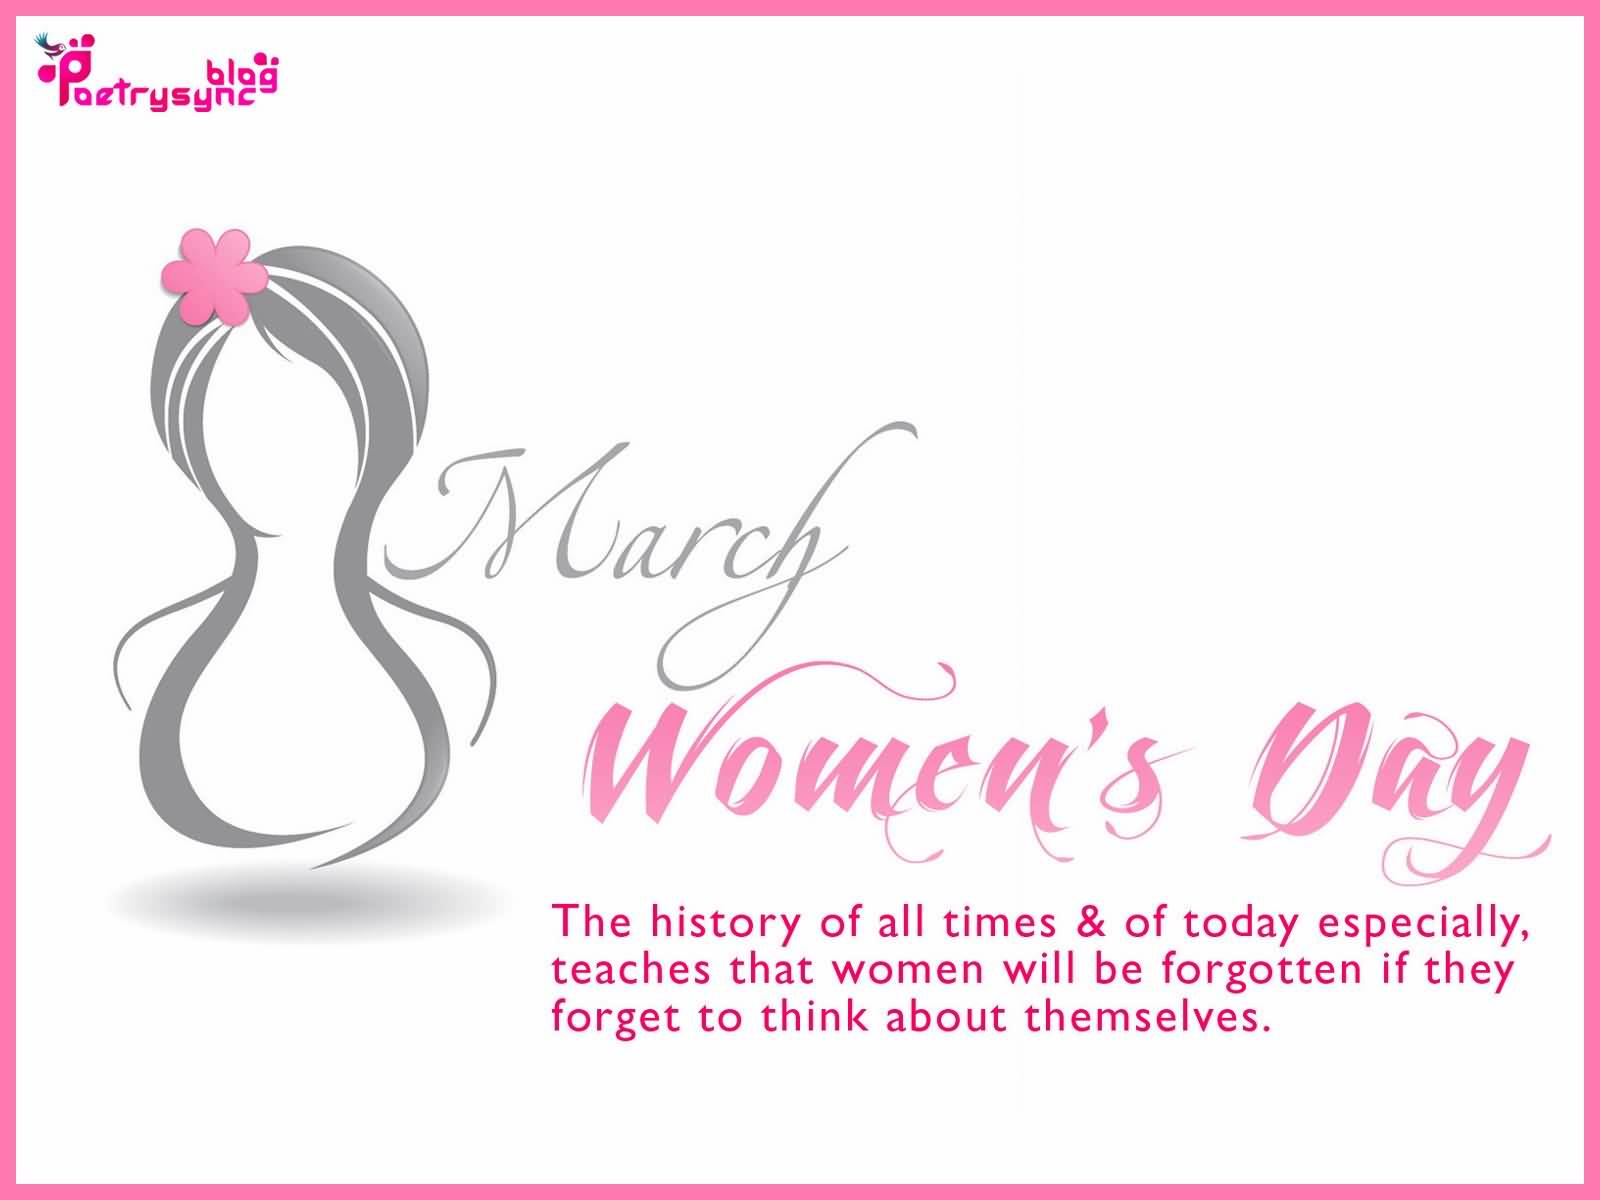 8 March Women's Day The History Of All Times & Of Today Especially, Teaches That Women Will Be Forgotten If They Forget To Think About Themselves.